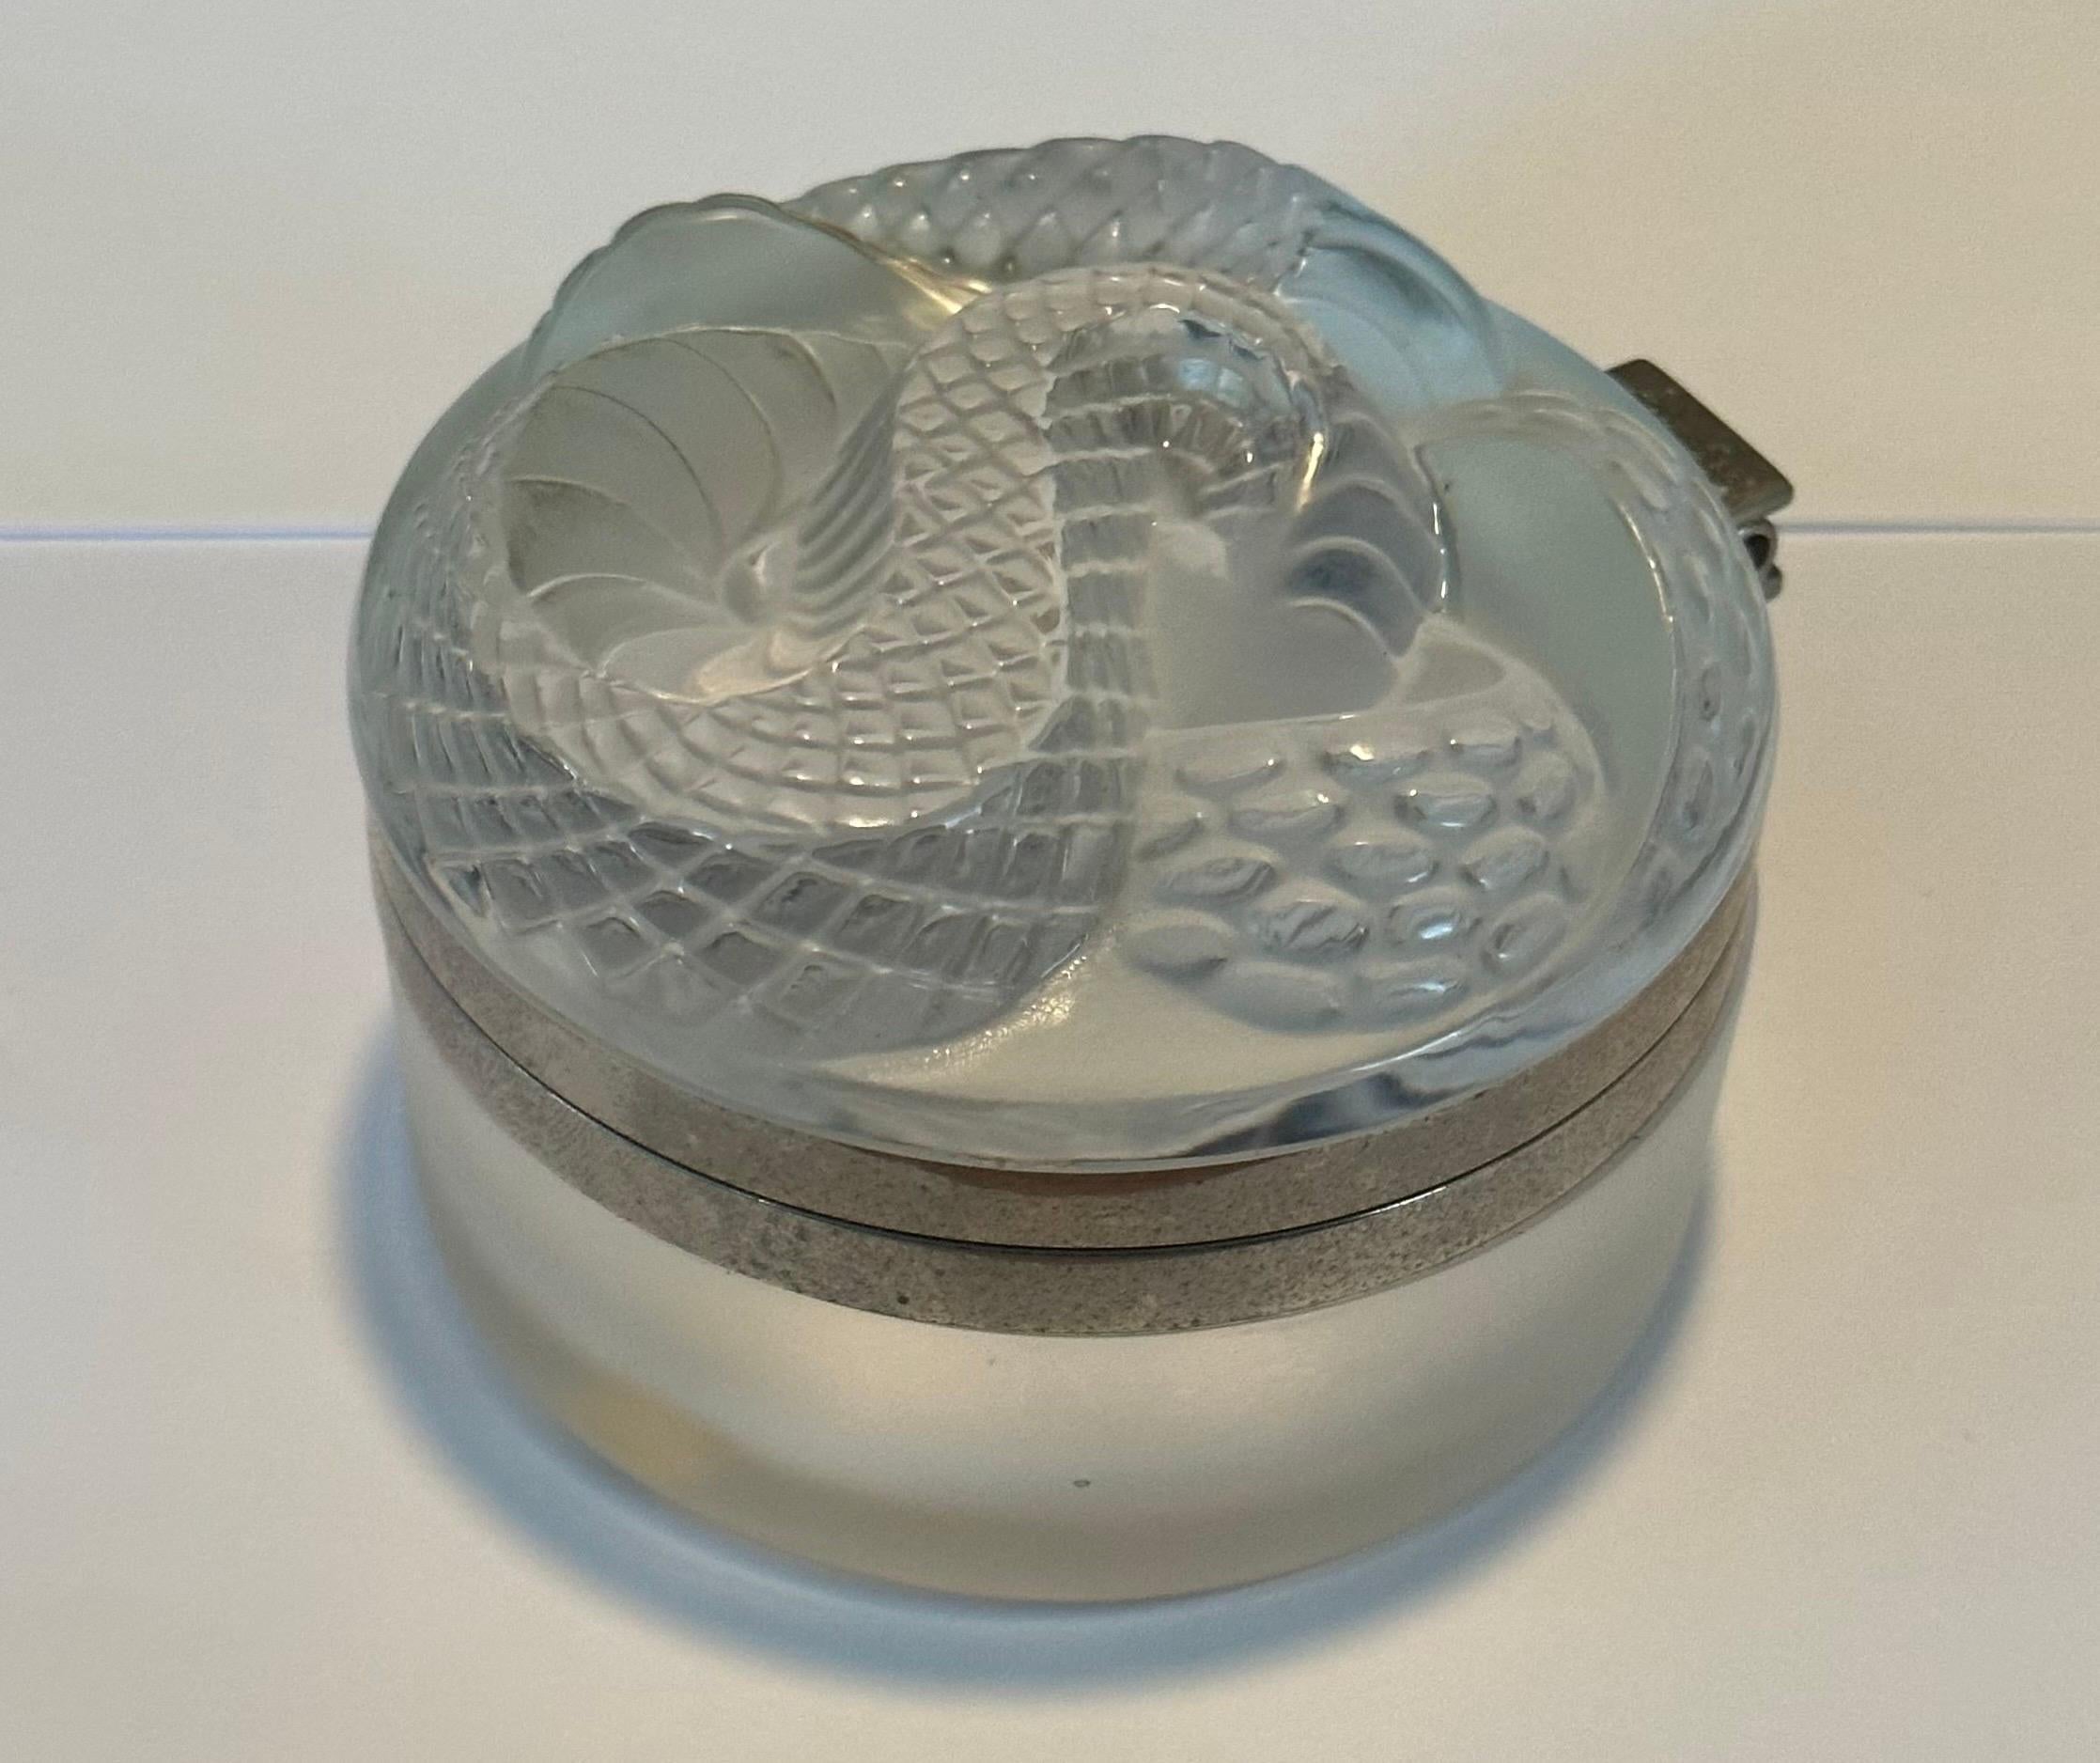 Frosted Crystal Coiled Serpent / Snake Lidded Powder Jar by Lalique of France 9